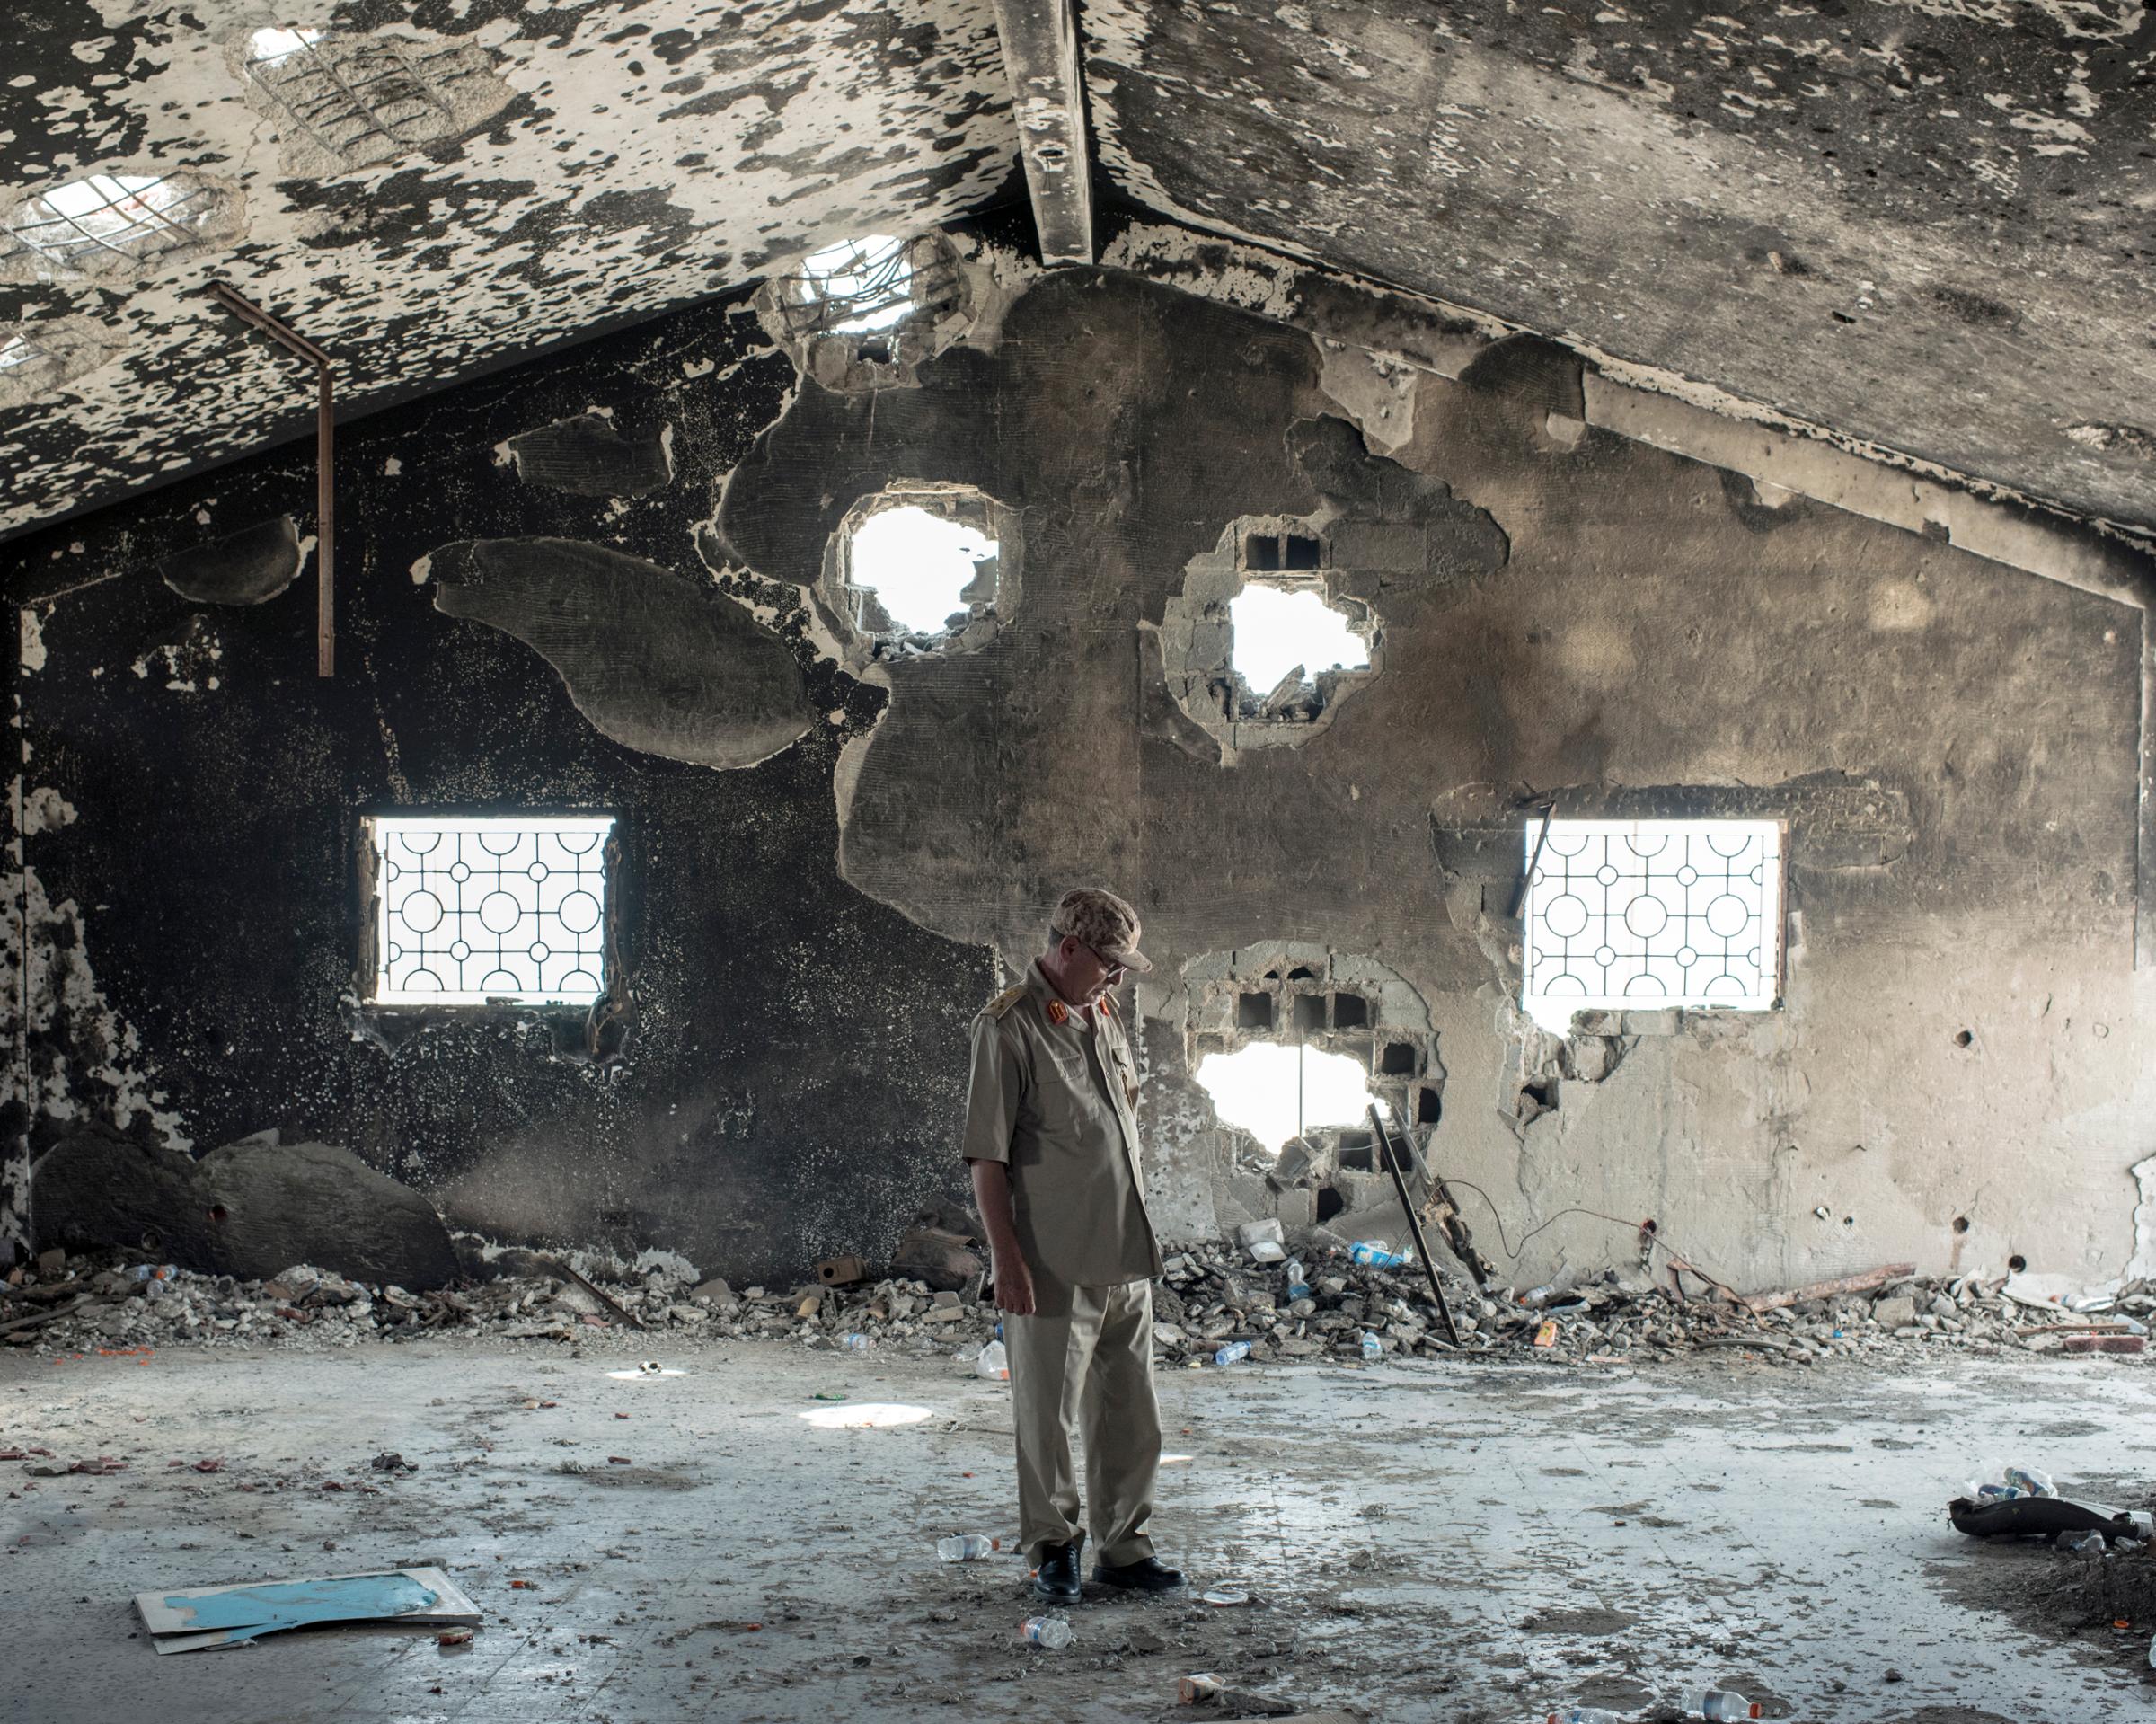 General-Brigadier Mohamed Al-Ghossri surveys the damage an ISIS suicide bomb wreaked upon a field hospital, Sirt, Libya, July 2016.